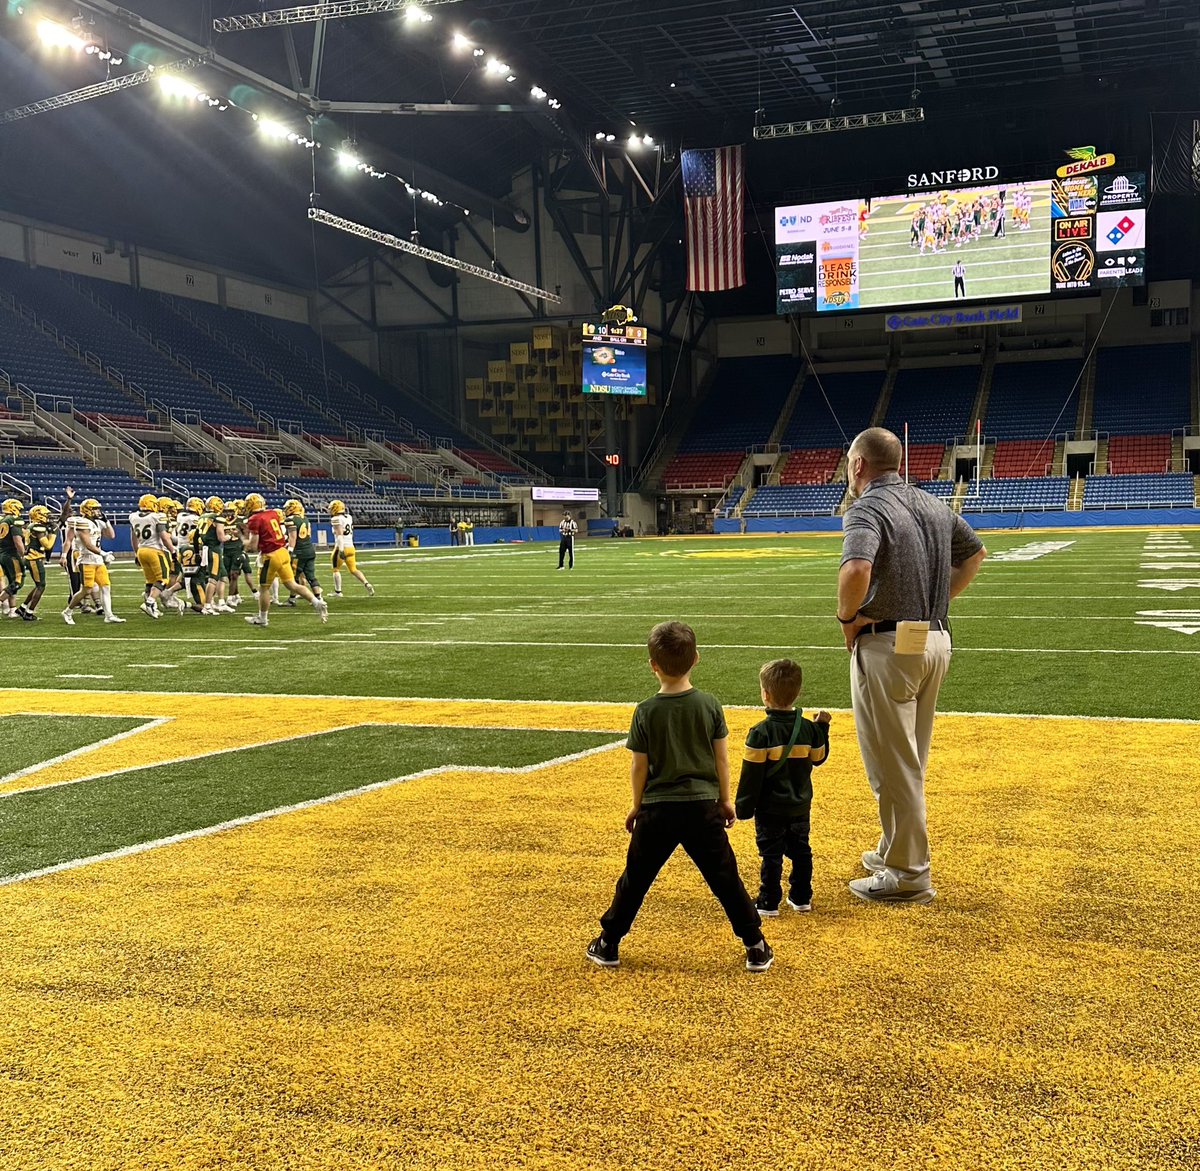 Thank you to our Bison fans for coming out today. Coach is getting the team ready alongside some future Bison. 🤘